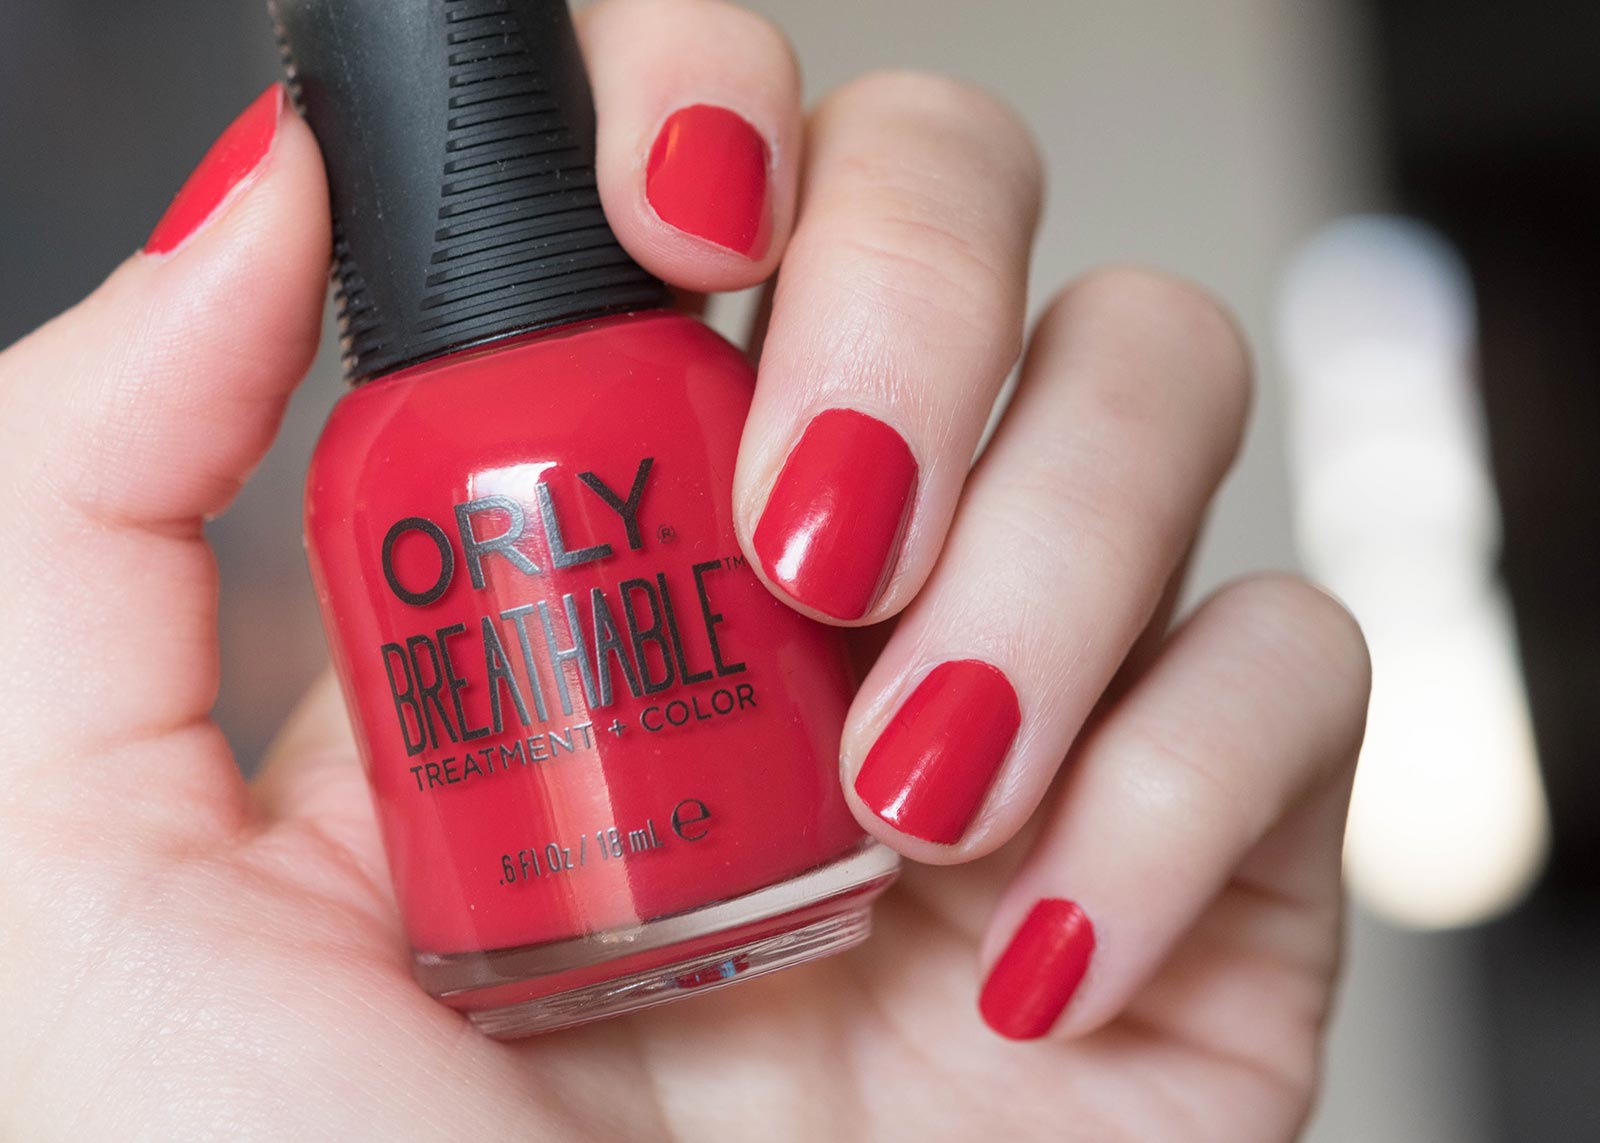 10. Orly Breathable Treatment + Color Nail Polish, Love My Nails - wide 1